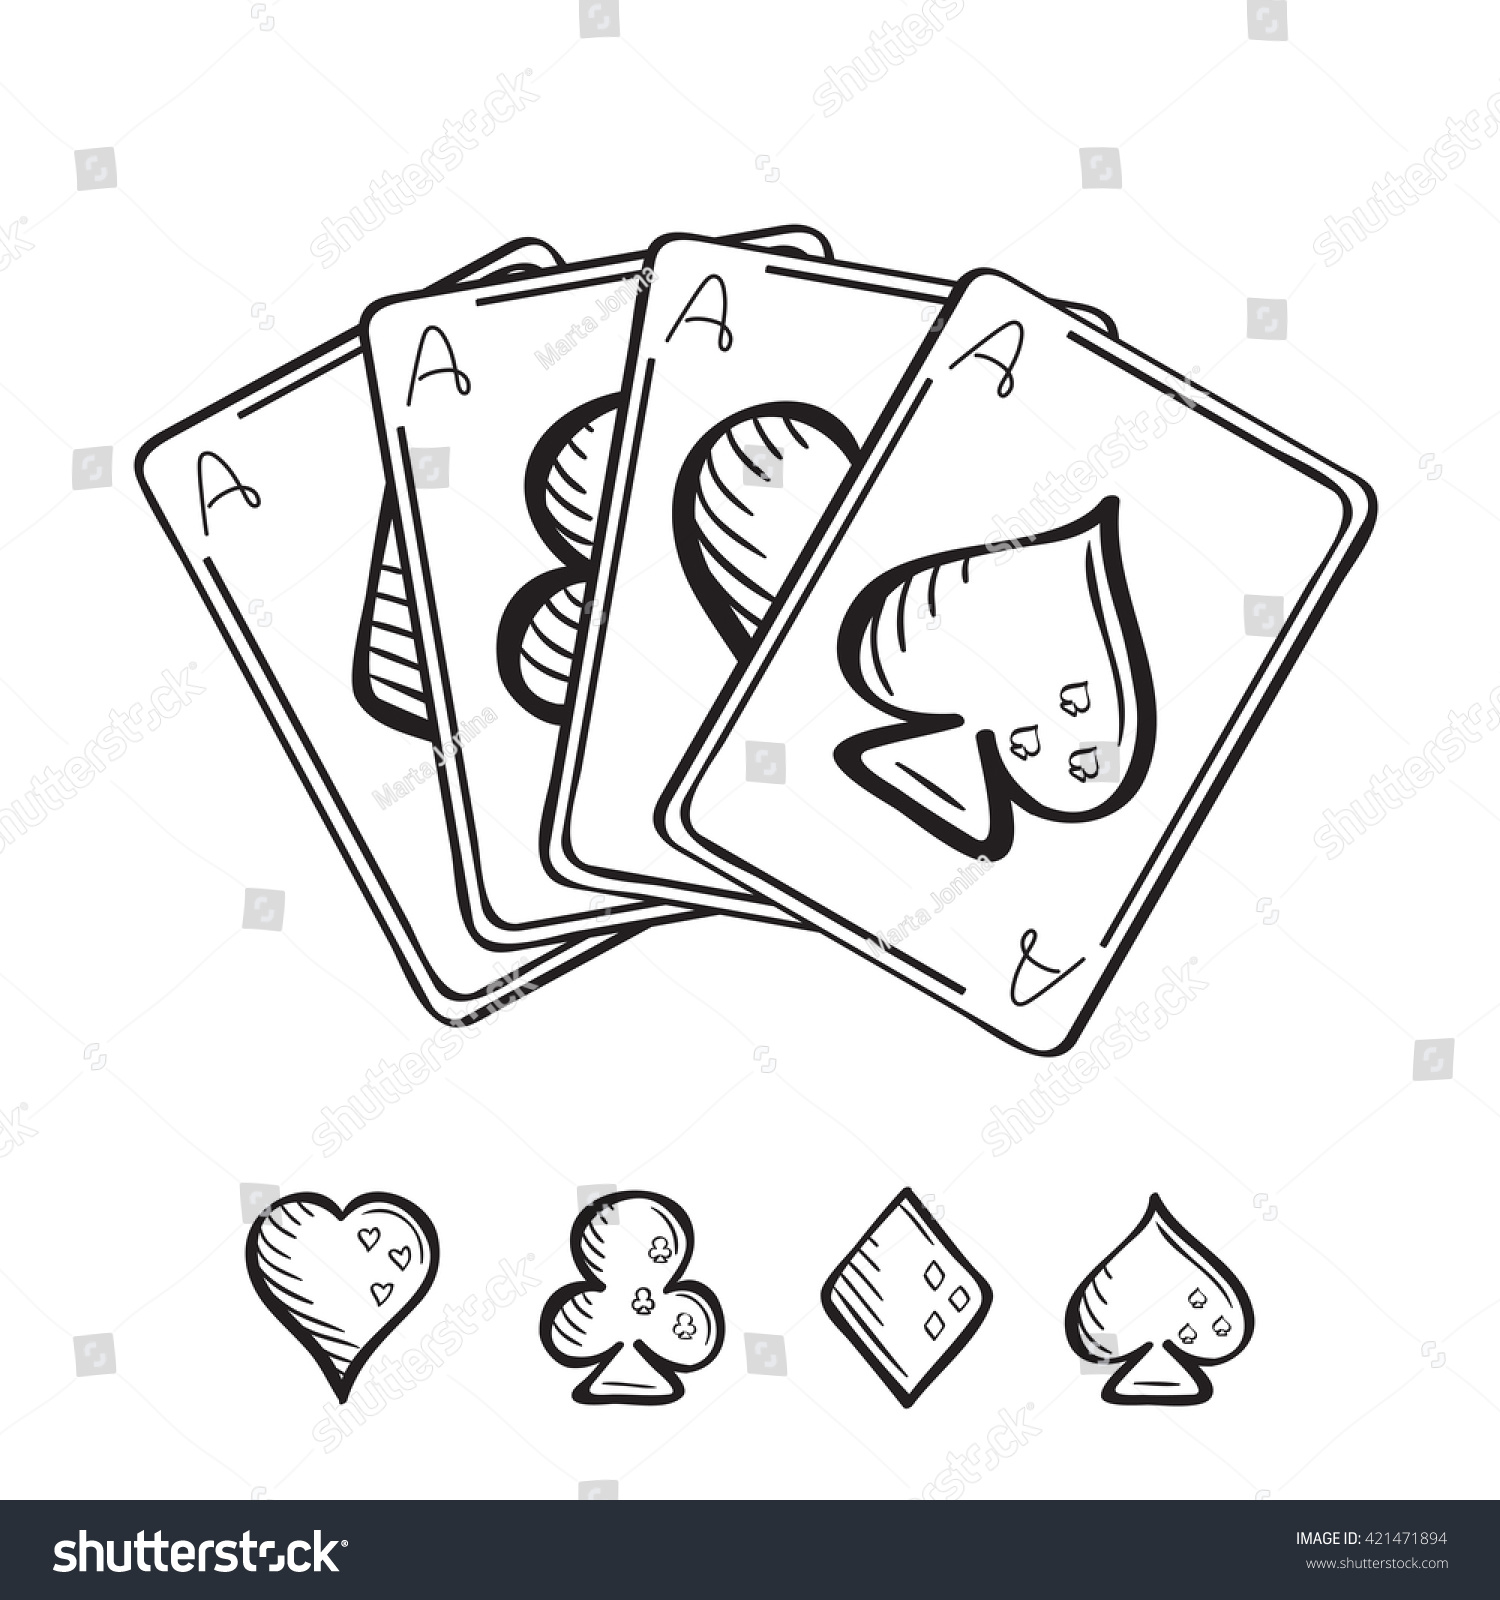 Set Sketch Playing Cards Hand Drawn Stock Vector (Royalty Free) 421471894